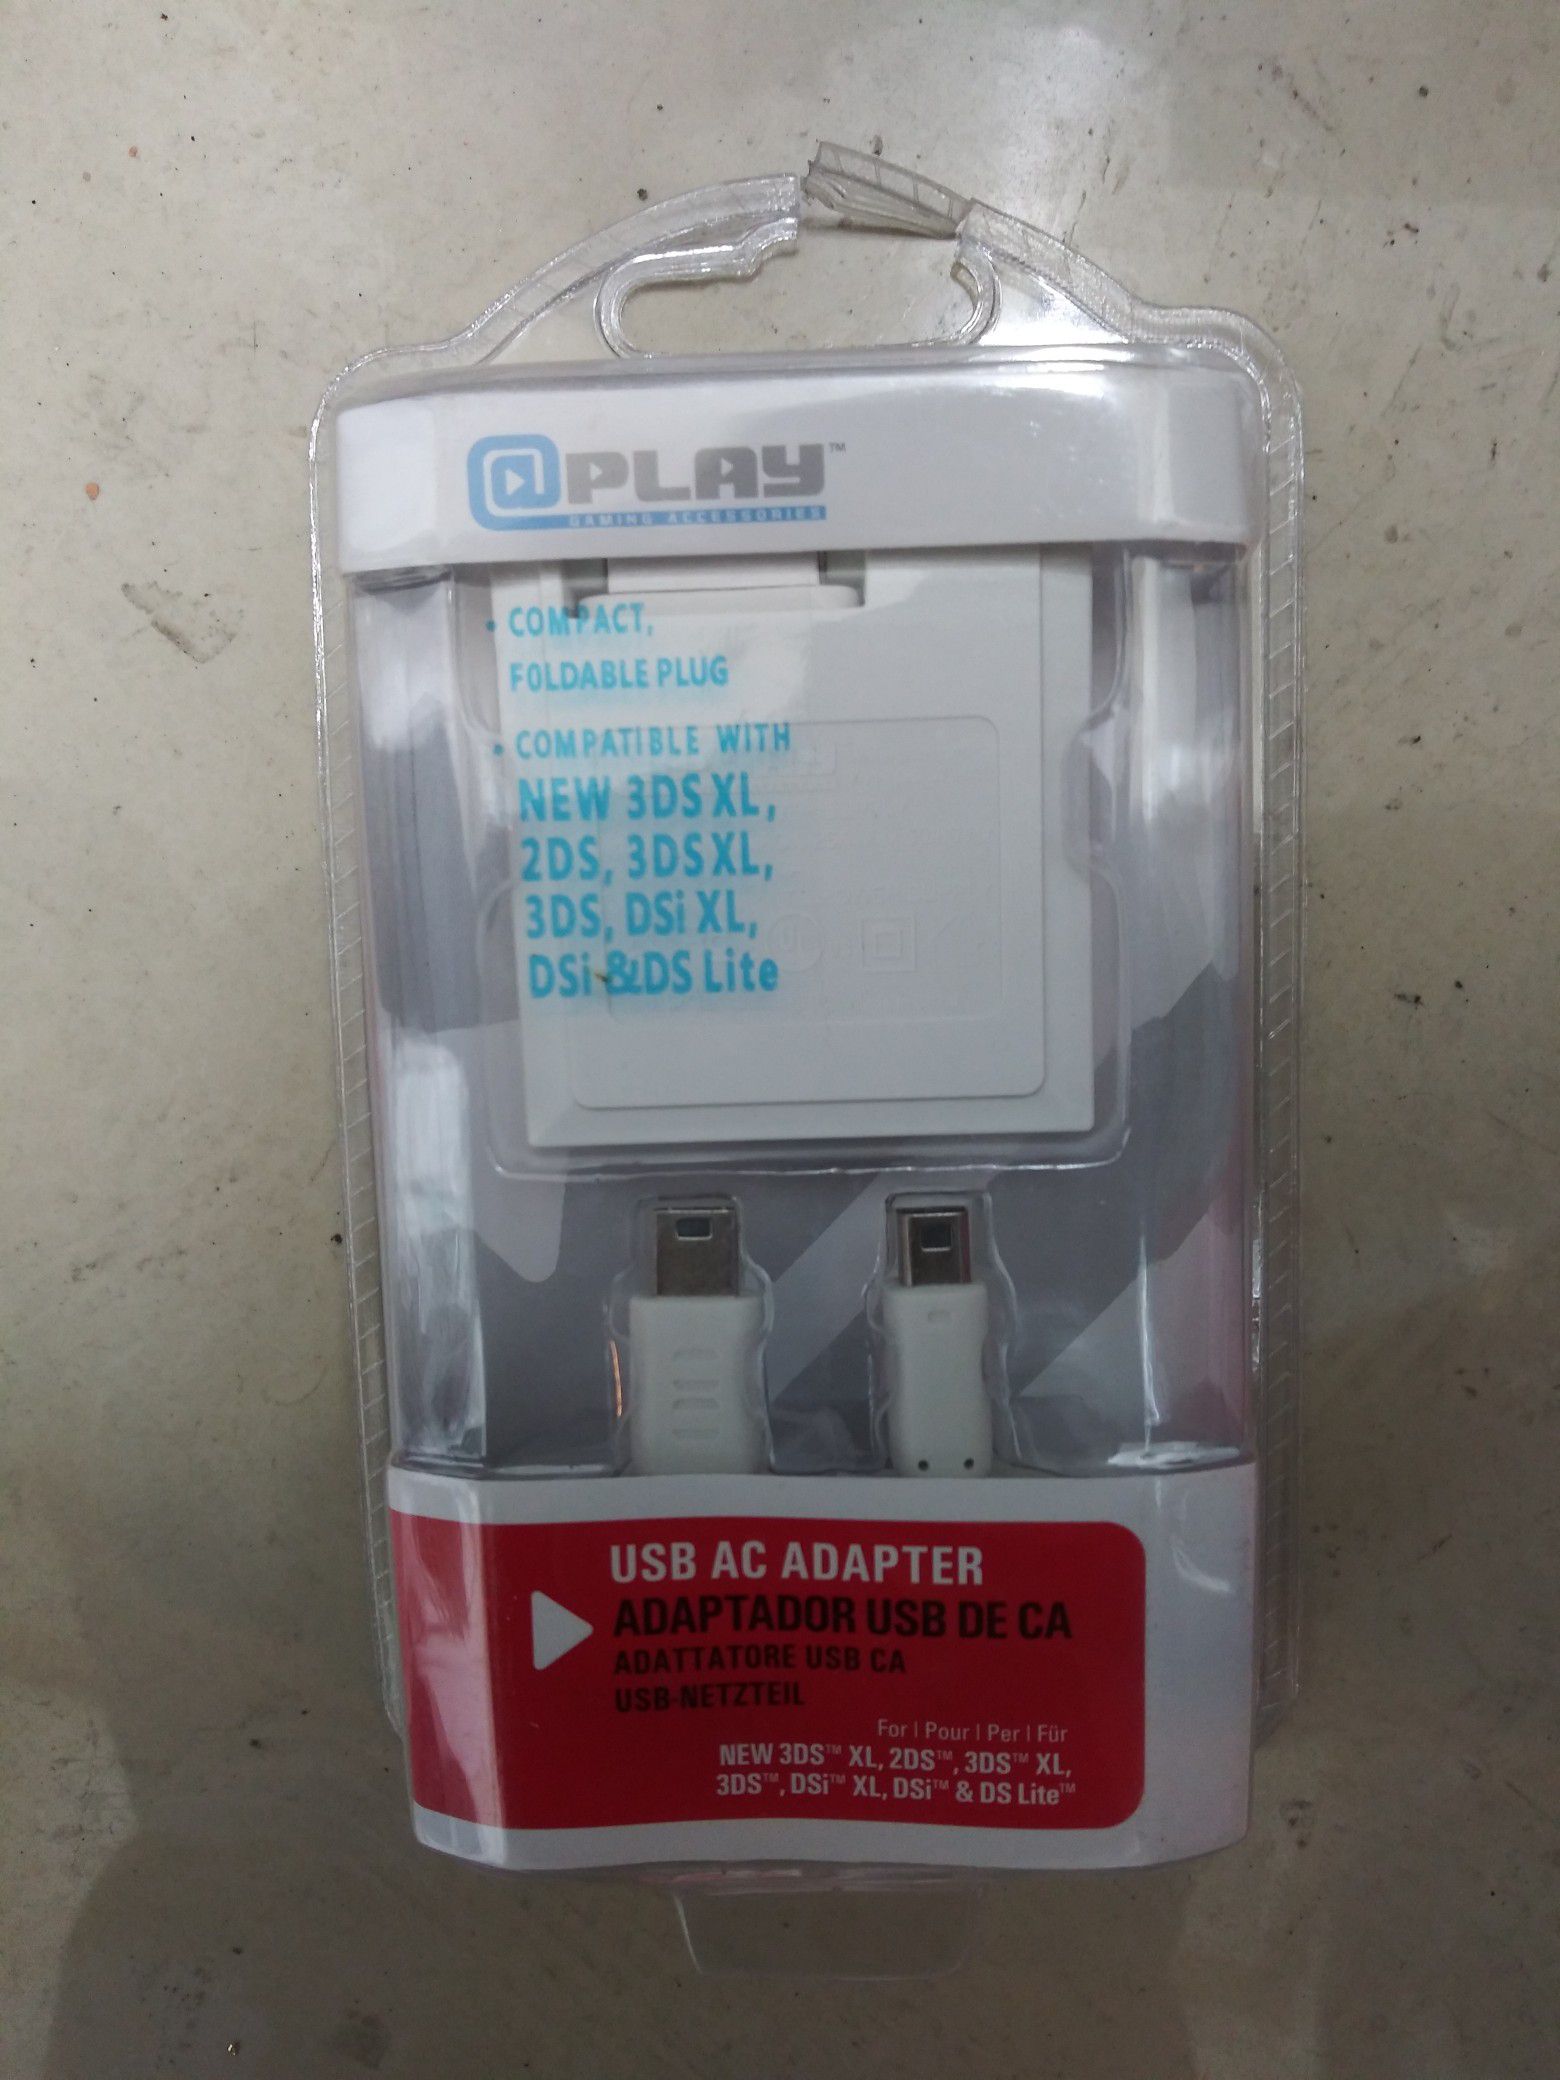 Charger for nintendo ds 3ds xl and more